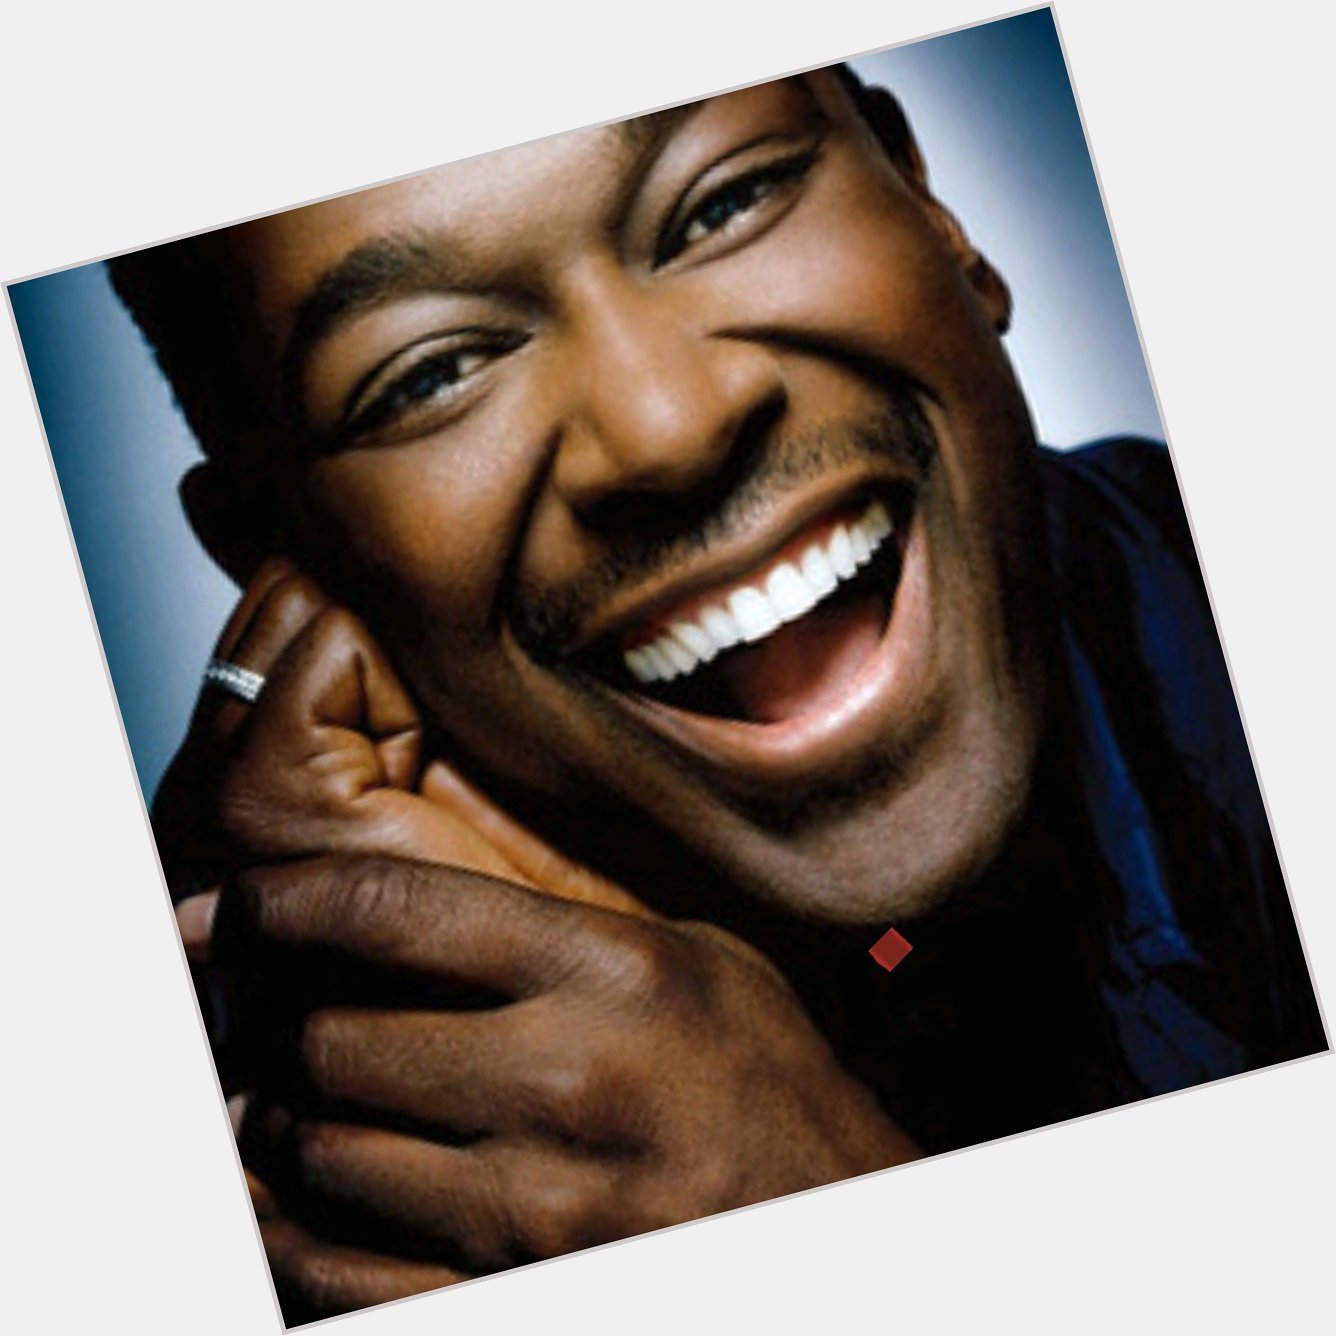 Happy Birthday Luther Vandross born on 4/20 day in 1951 in THE BRONX. Light one up and enjoy his classics.      